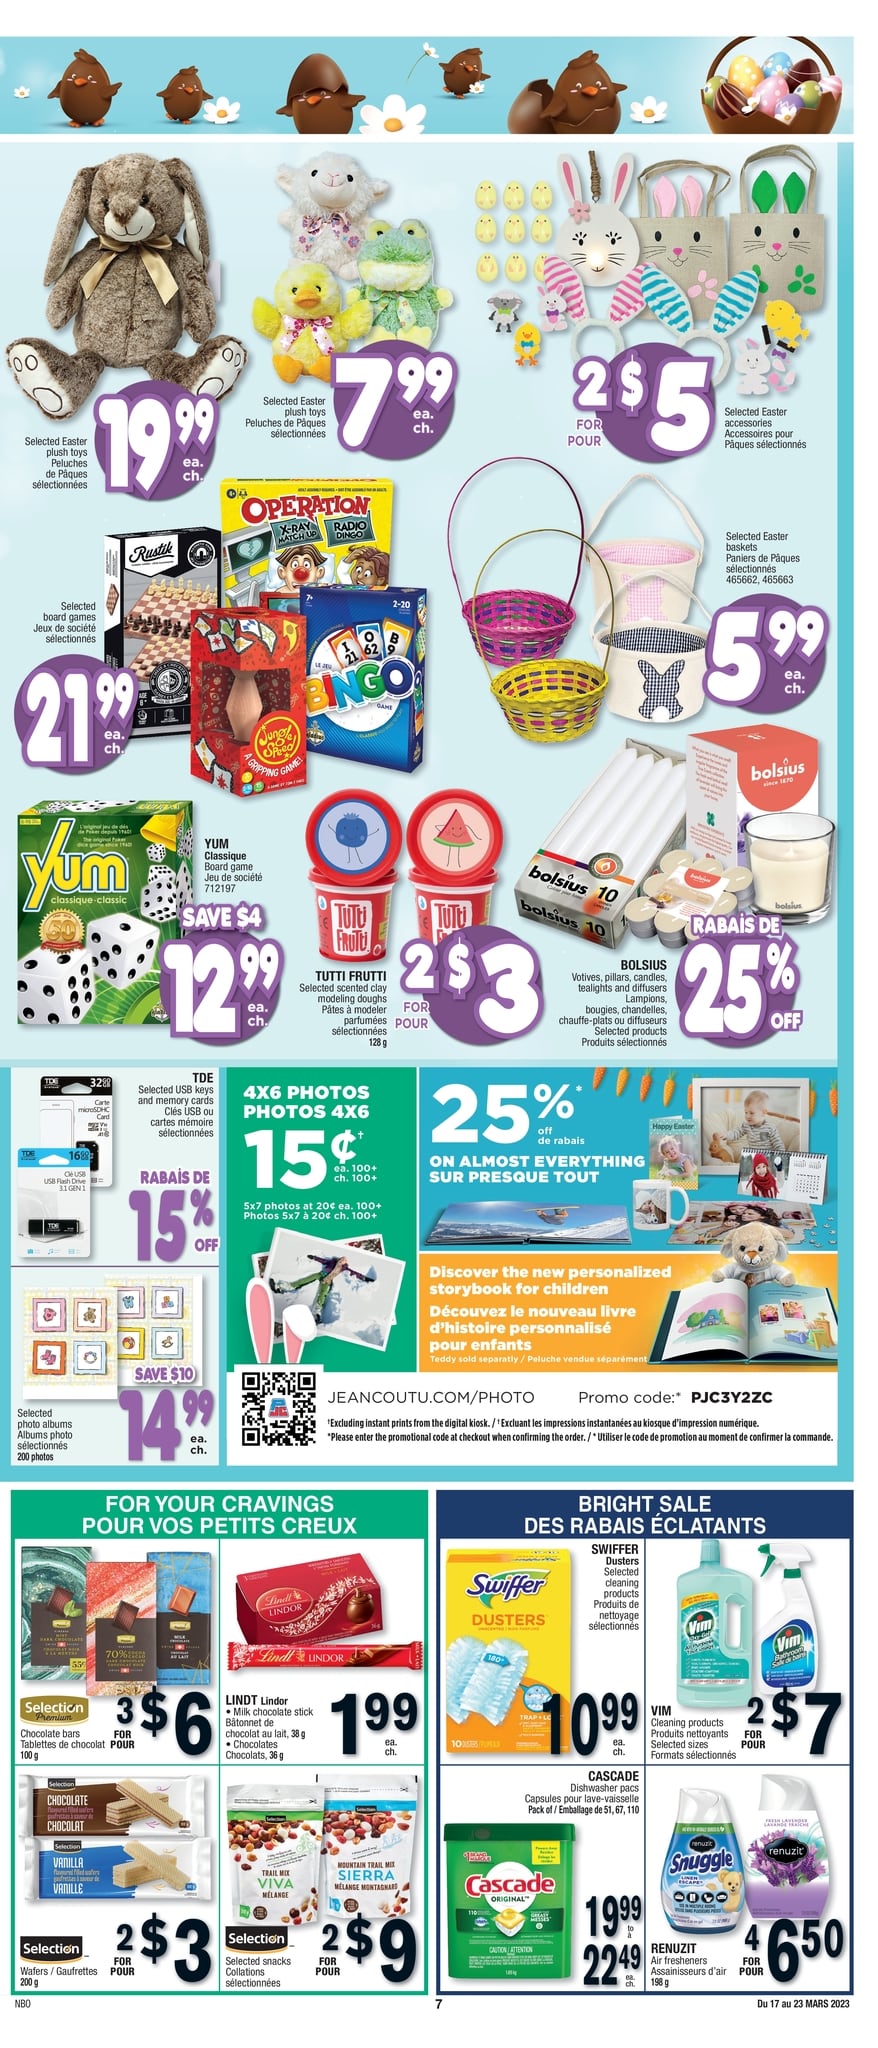 Jean Coutu - Weekly Flyer Specials - Page 13